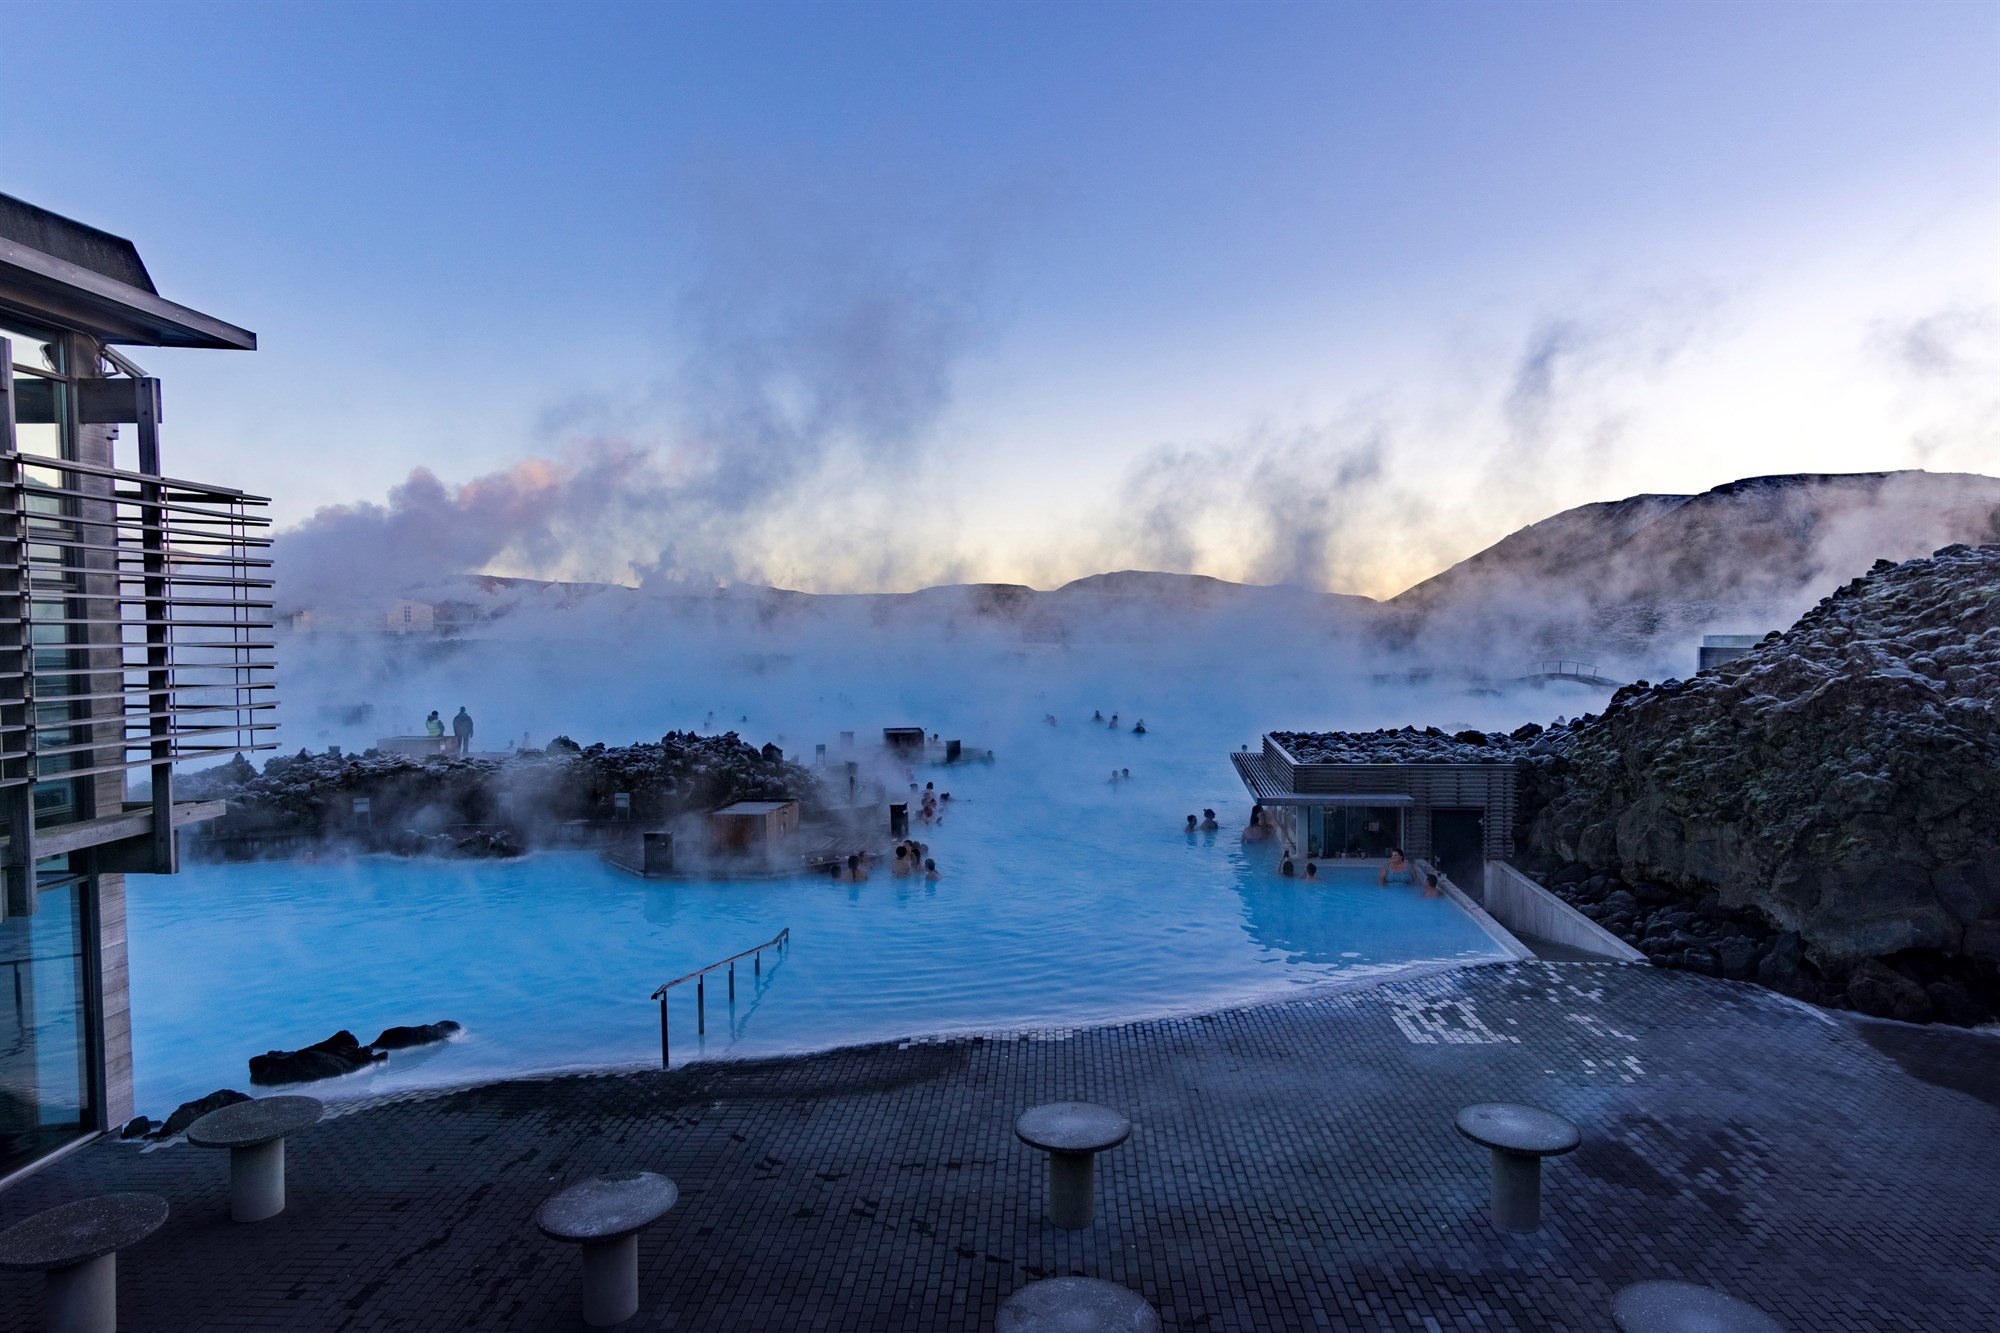 Blue Lagoon and other things to do near Reykjavik in Iceland